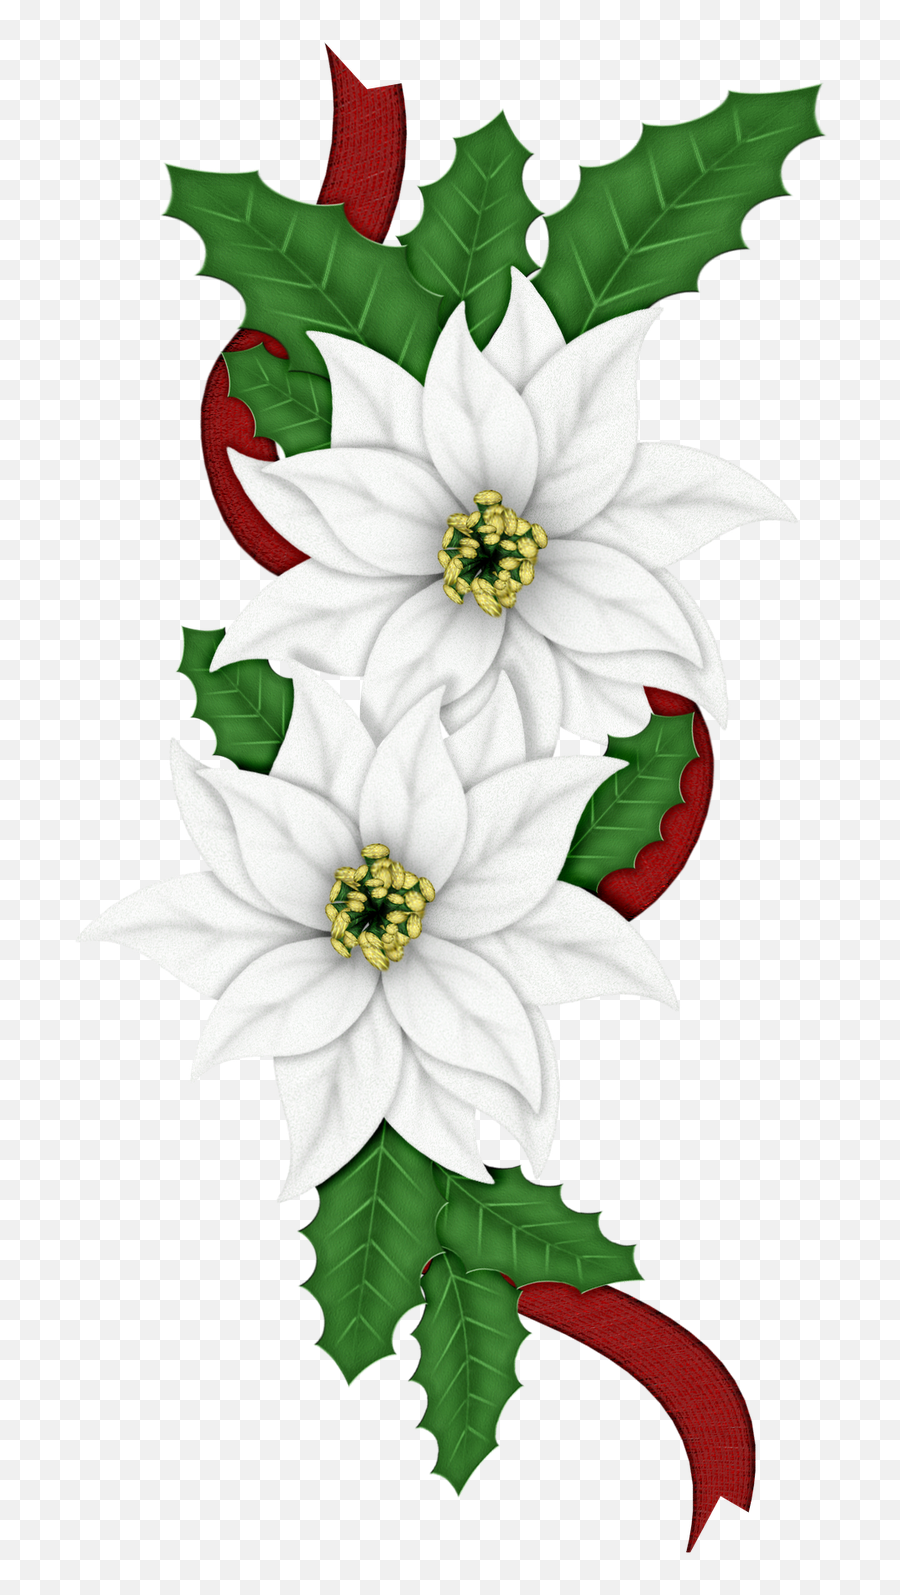 Edelweiss Png - Clip Art Of Christmas Flowers Transparent Christmas Edelweiss Emoji,Flowers Transparent